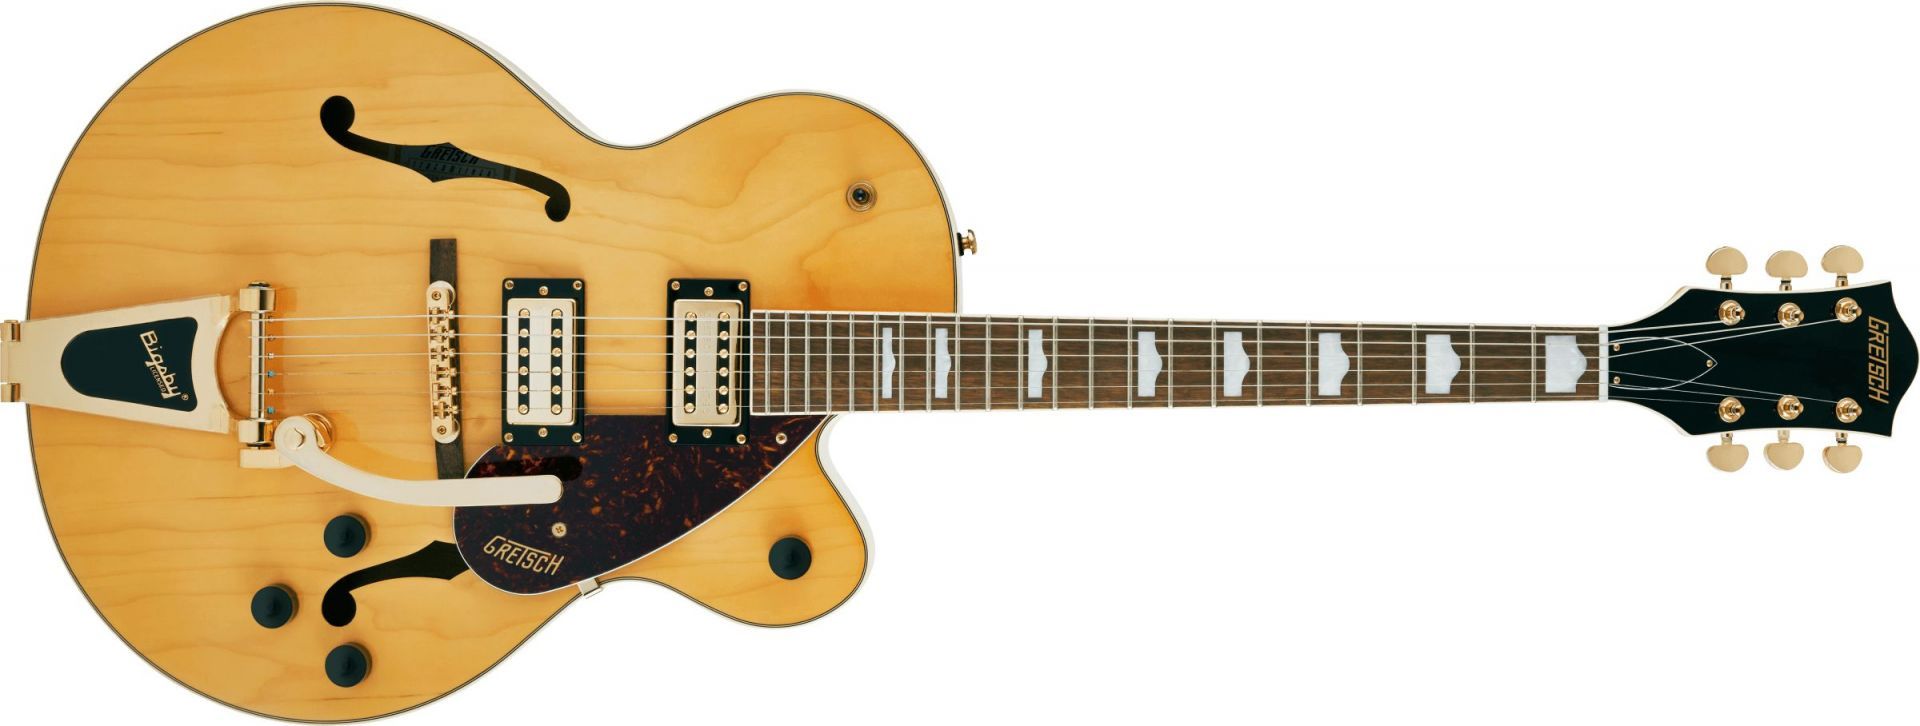 Gretsch Guitars G2410TG Streamliner Hollow Body Single-Cut with Bigsby and Gold Hardware Village Amber